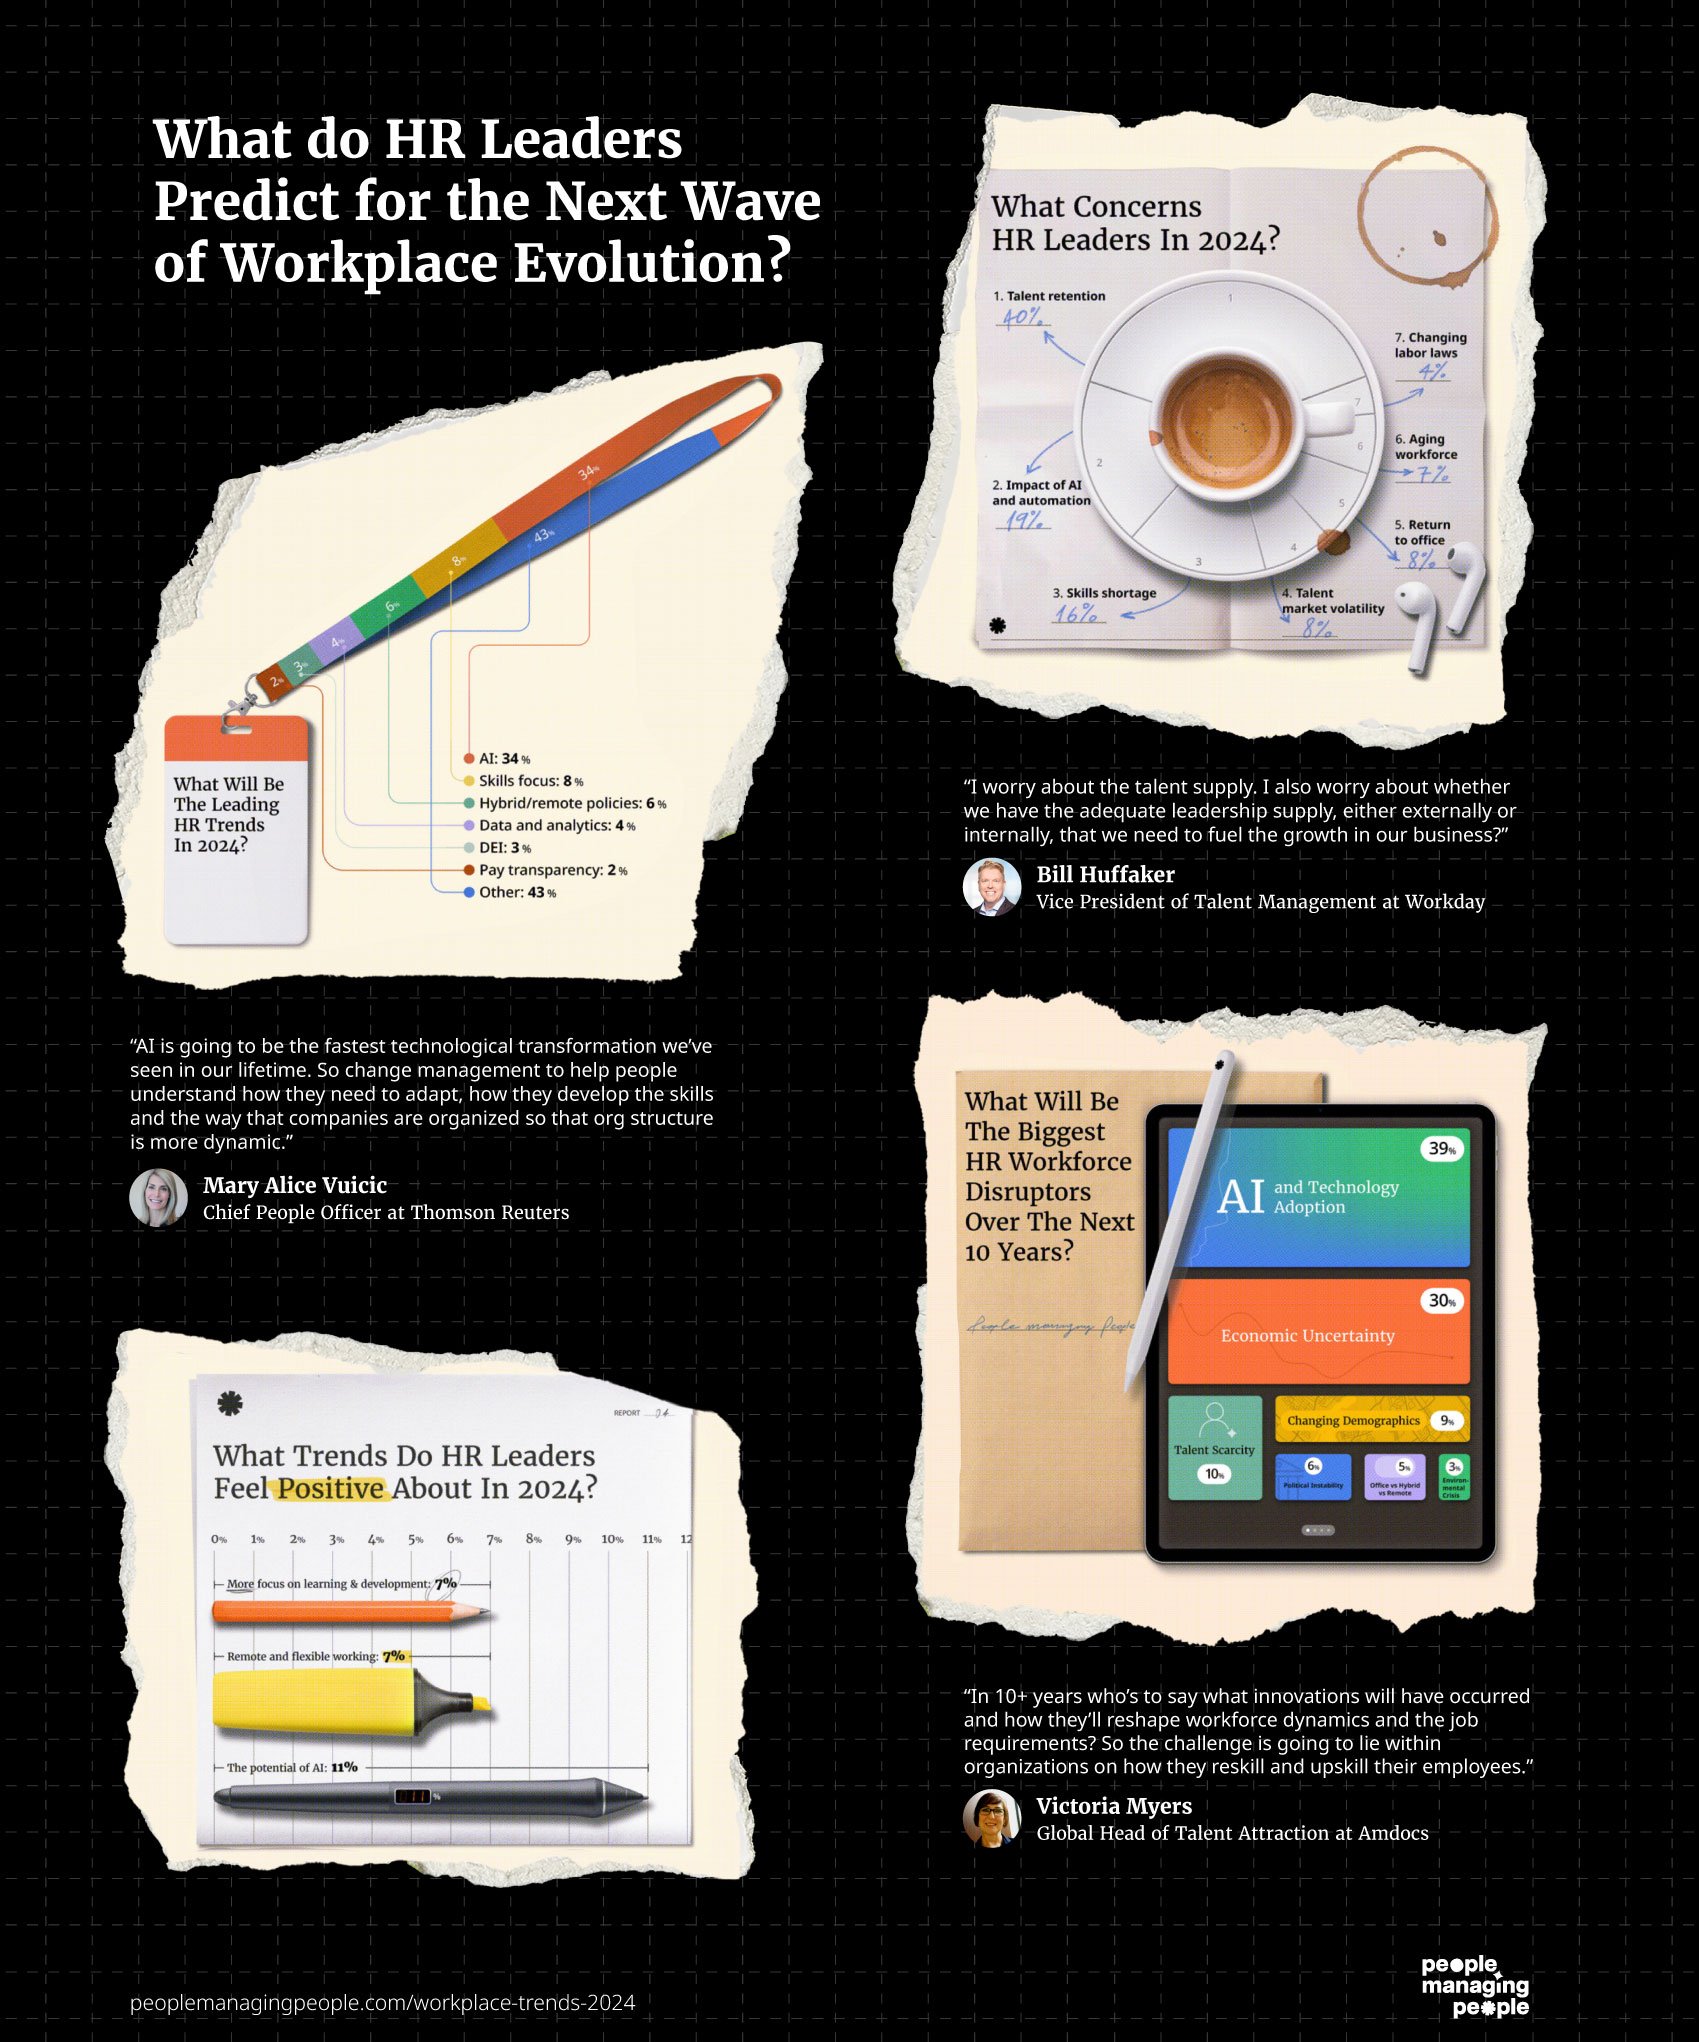 HR predictions for the next wave of workplace evolutions.